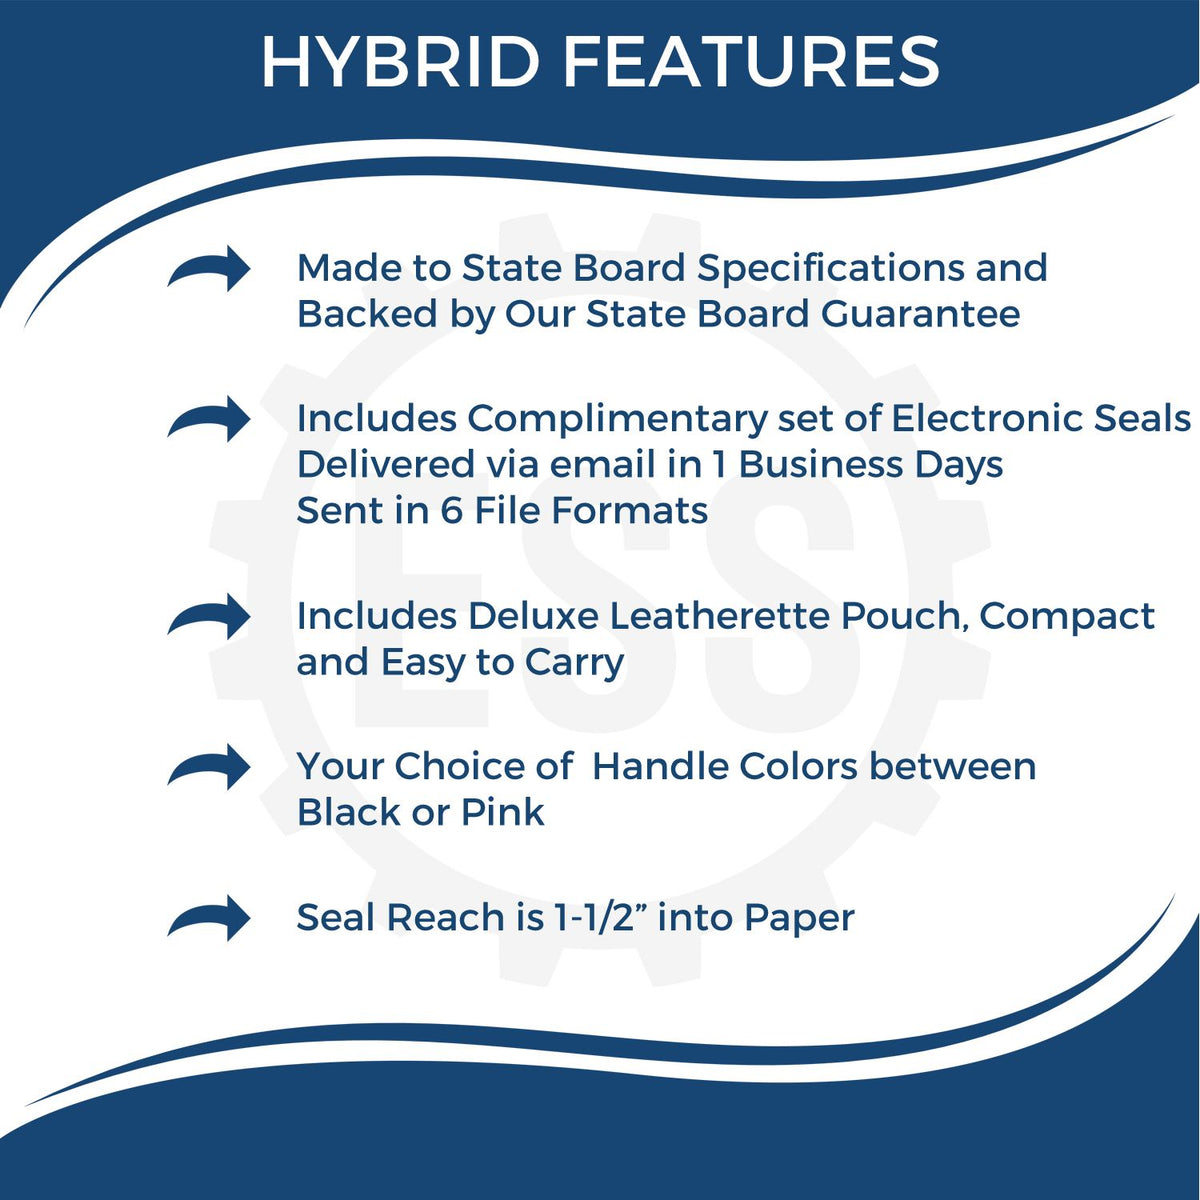 A picture of an infographic highlighting the selling points for the Hybrid Ohio Engineer Seal